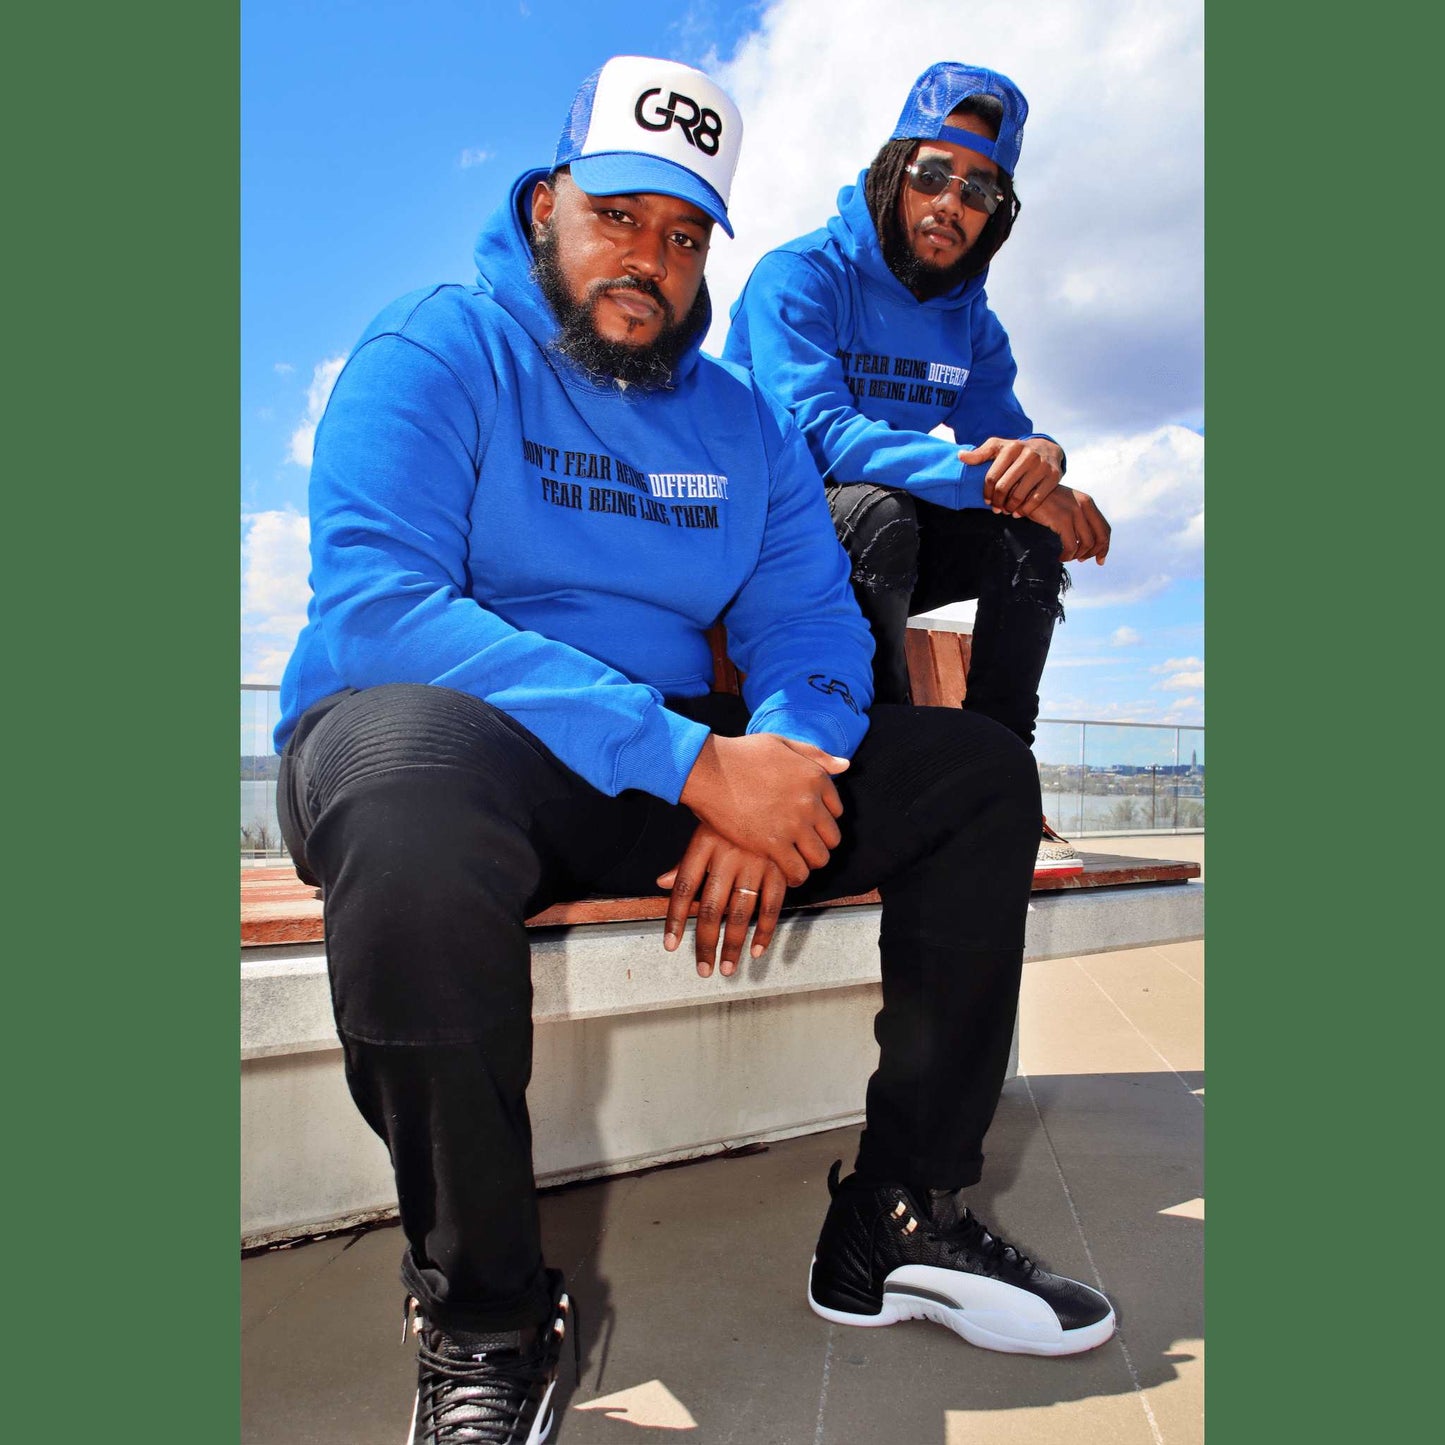 GR8 BE DIFFERENT HOODIE - BLUE/BLACK/WHITE | GR8 Clothing Line